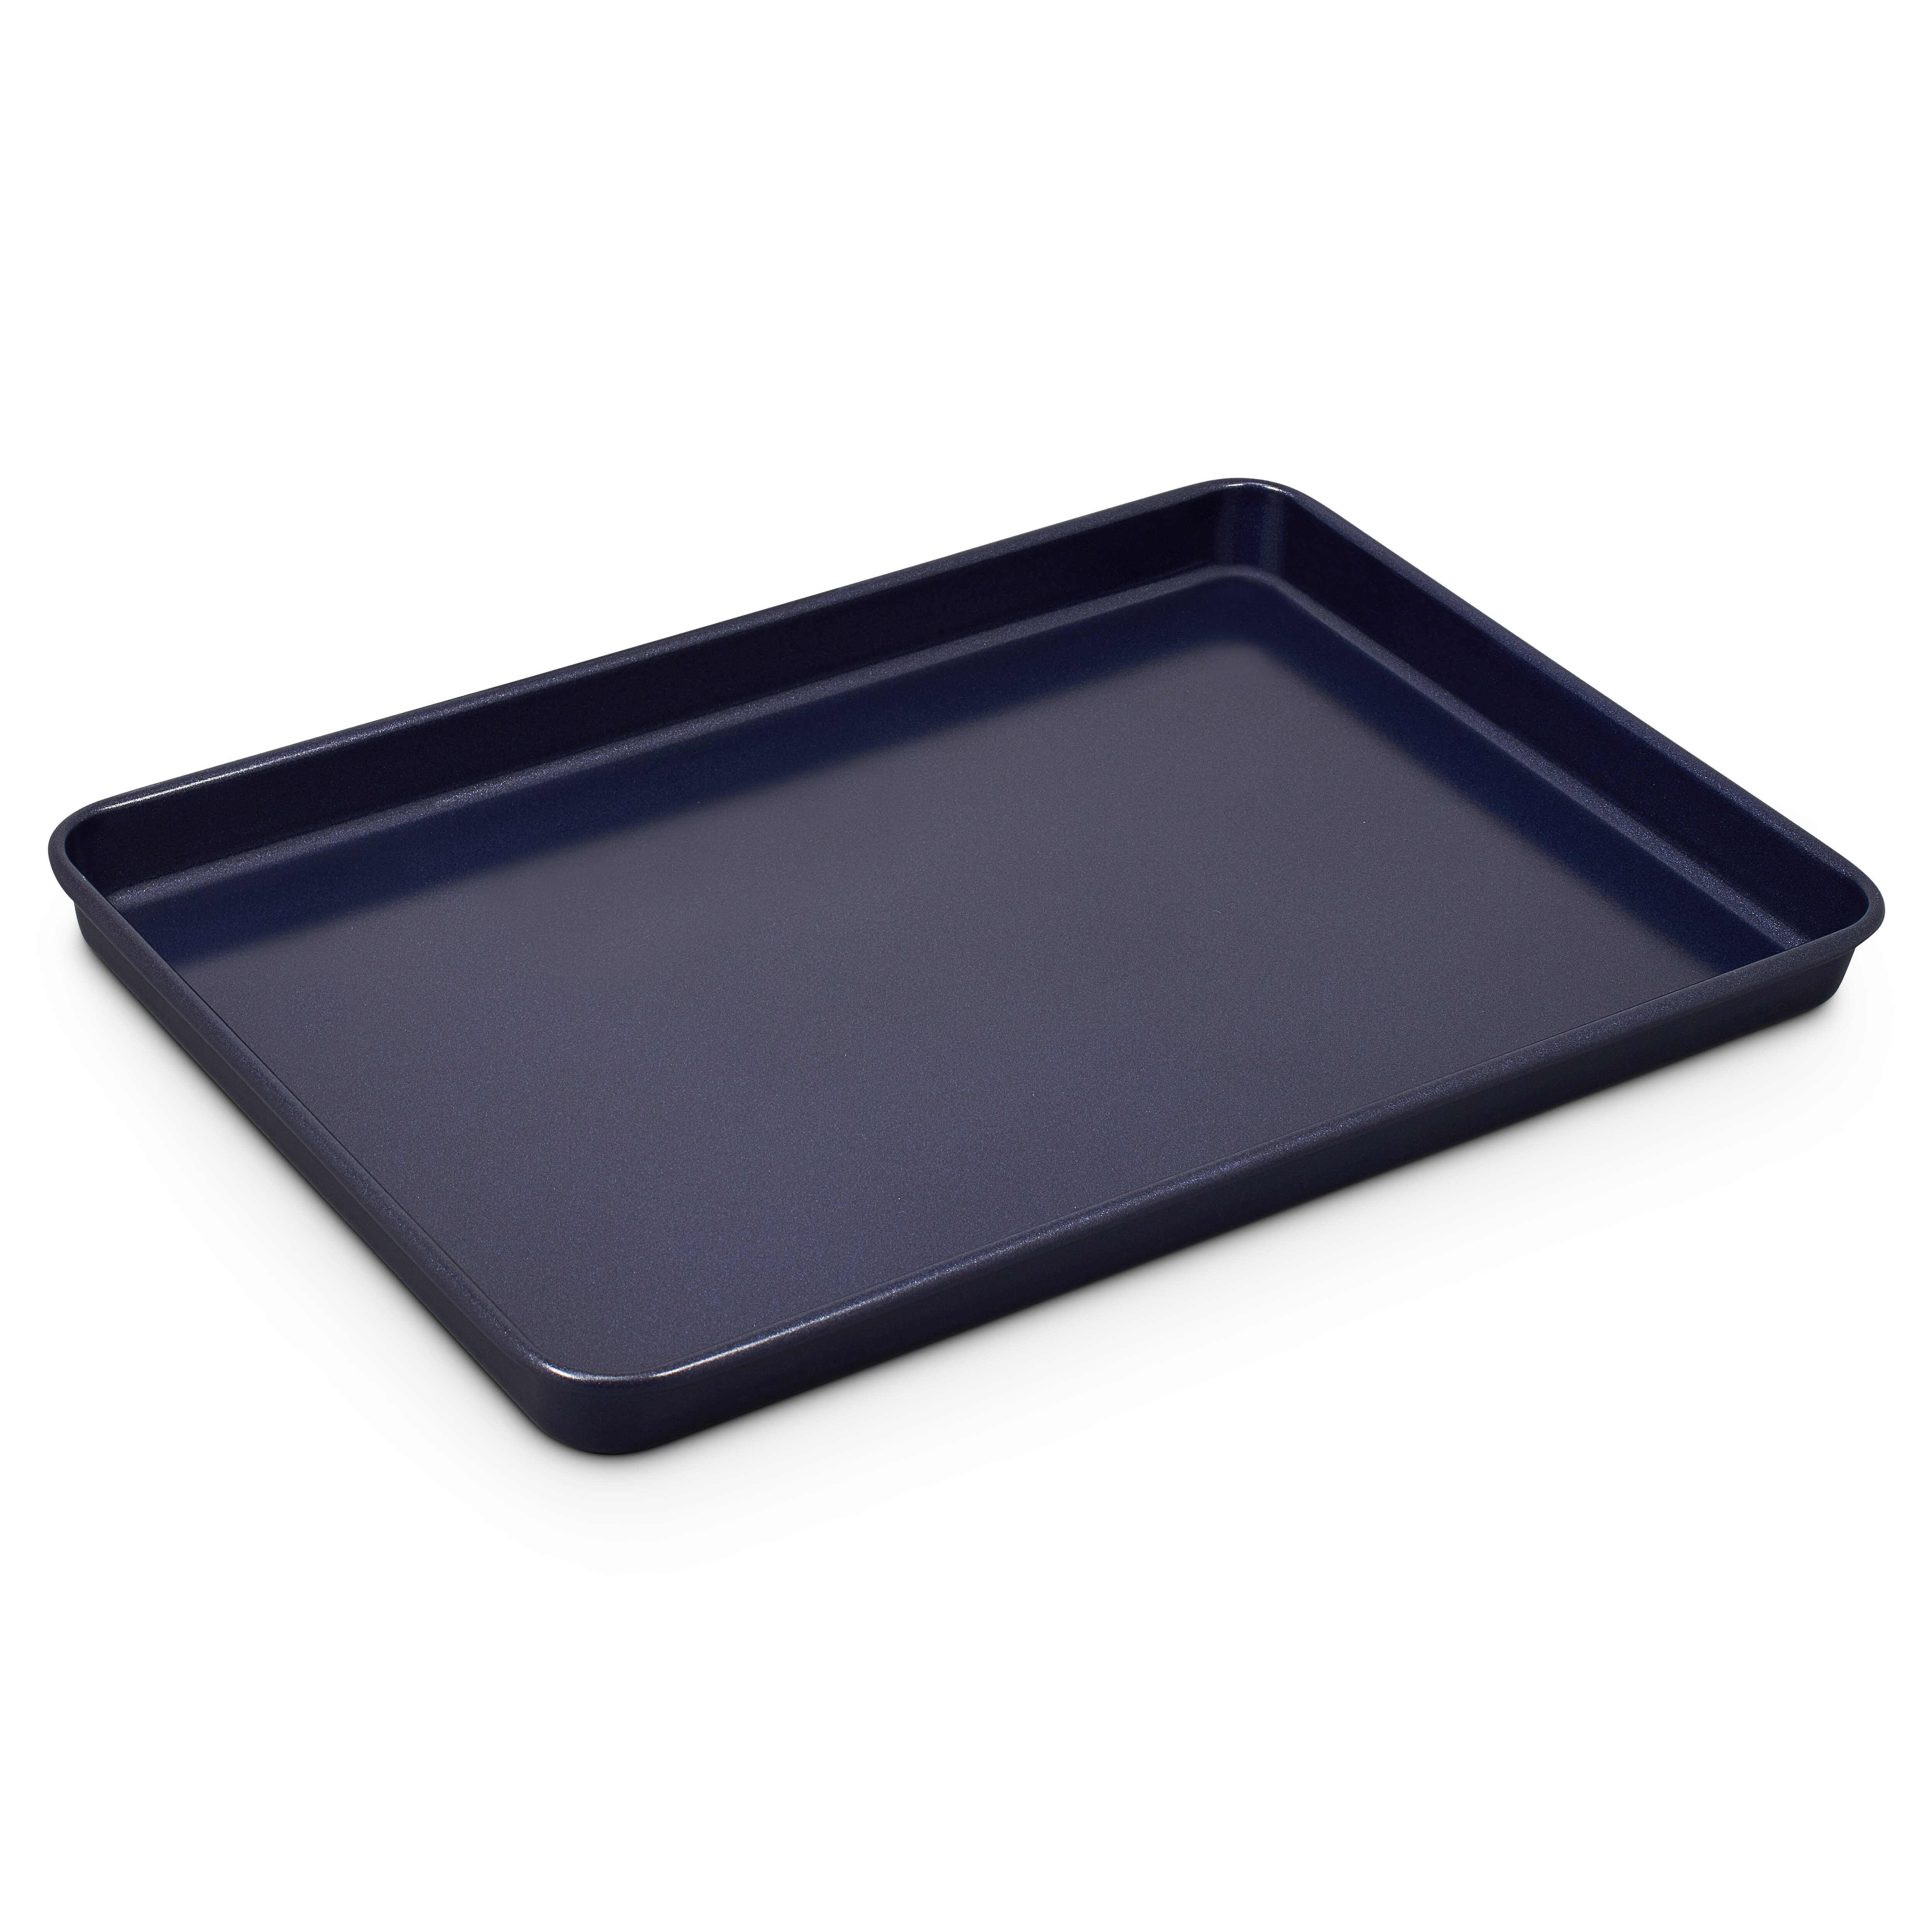 Zyliss 14 in. Nonstick Cake & Brownie Pan, Dishwasher Safe